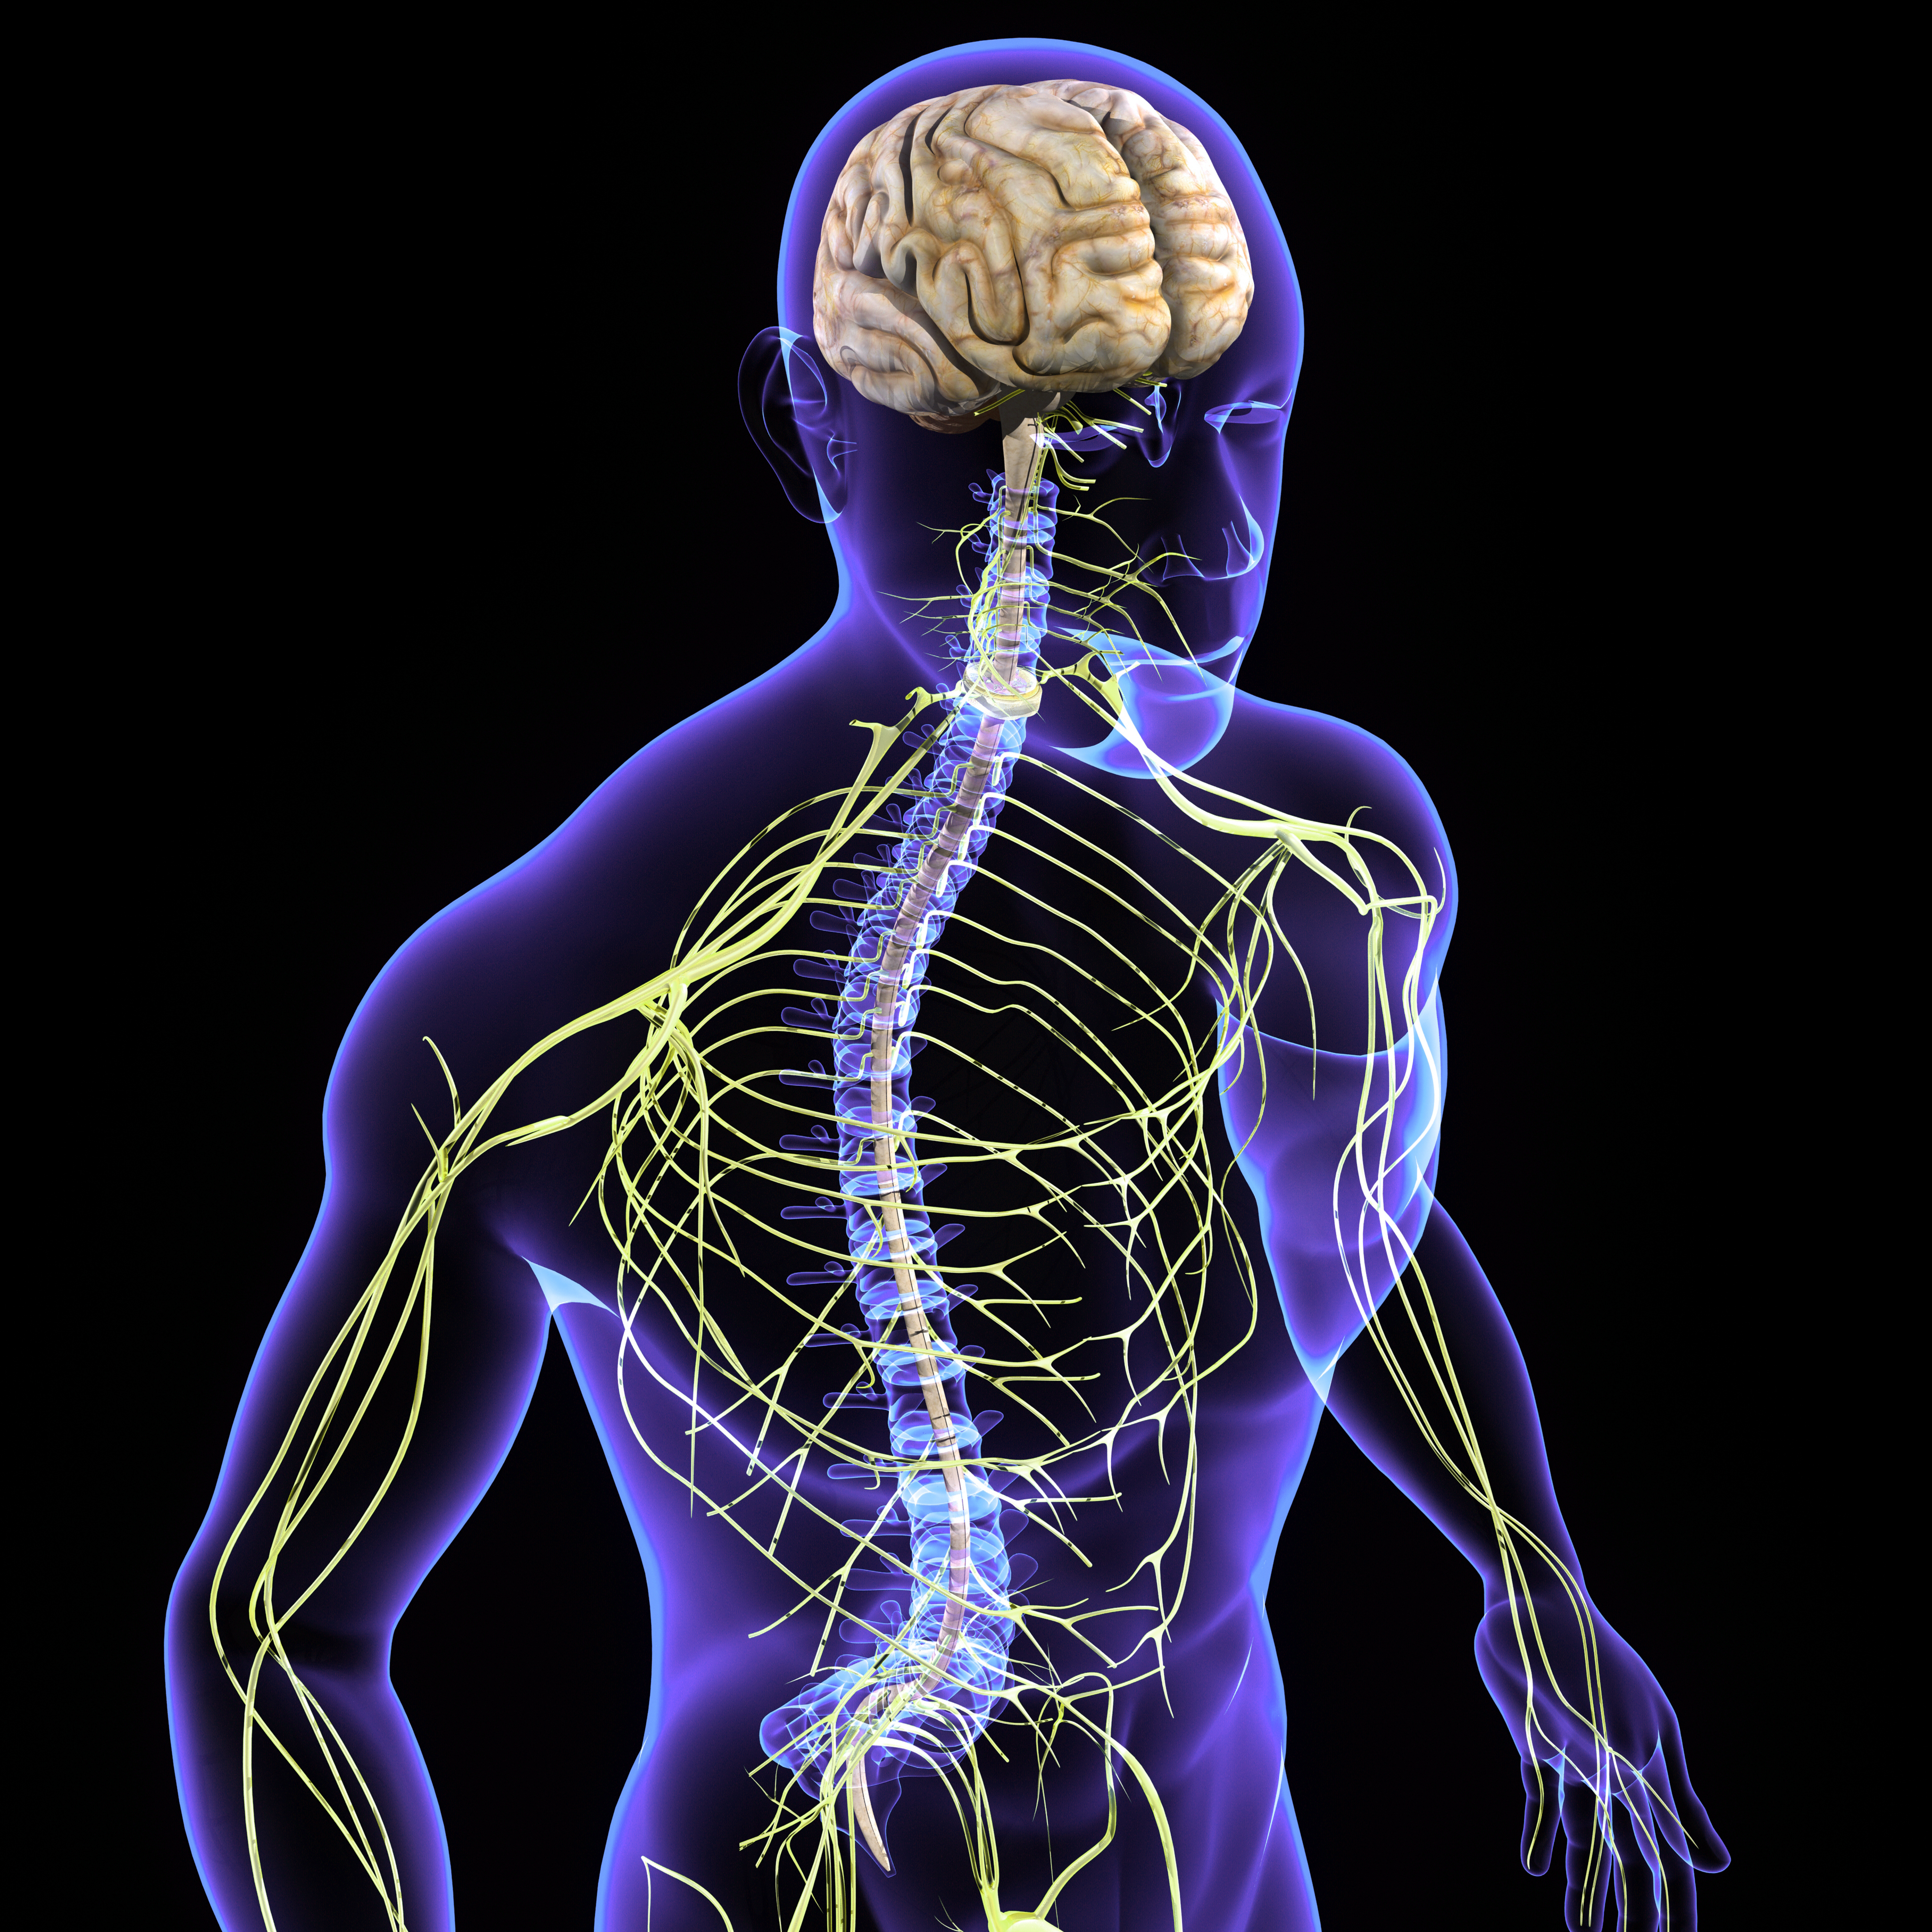 The nervous system is the part of an animal's body that coordinates its voluntary and involuntary actions and transmits signals between different parts of its body. Nervous tissue first arose in wormlike organisms about 550 to 600 million years ago. In most animal species it consists of two main parts, the central nervous system (CNS) and the peripheral nervous system (PNS). The CNS contains the brain and spinal cord. The PNS consists mainly of nerves, which are enclosed bundles of the long fibers or axons, that connect the CNS to every other part of the body.